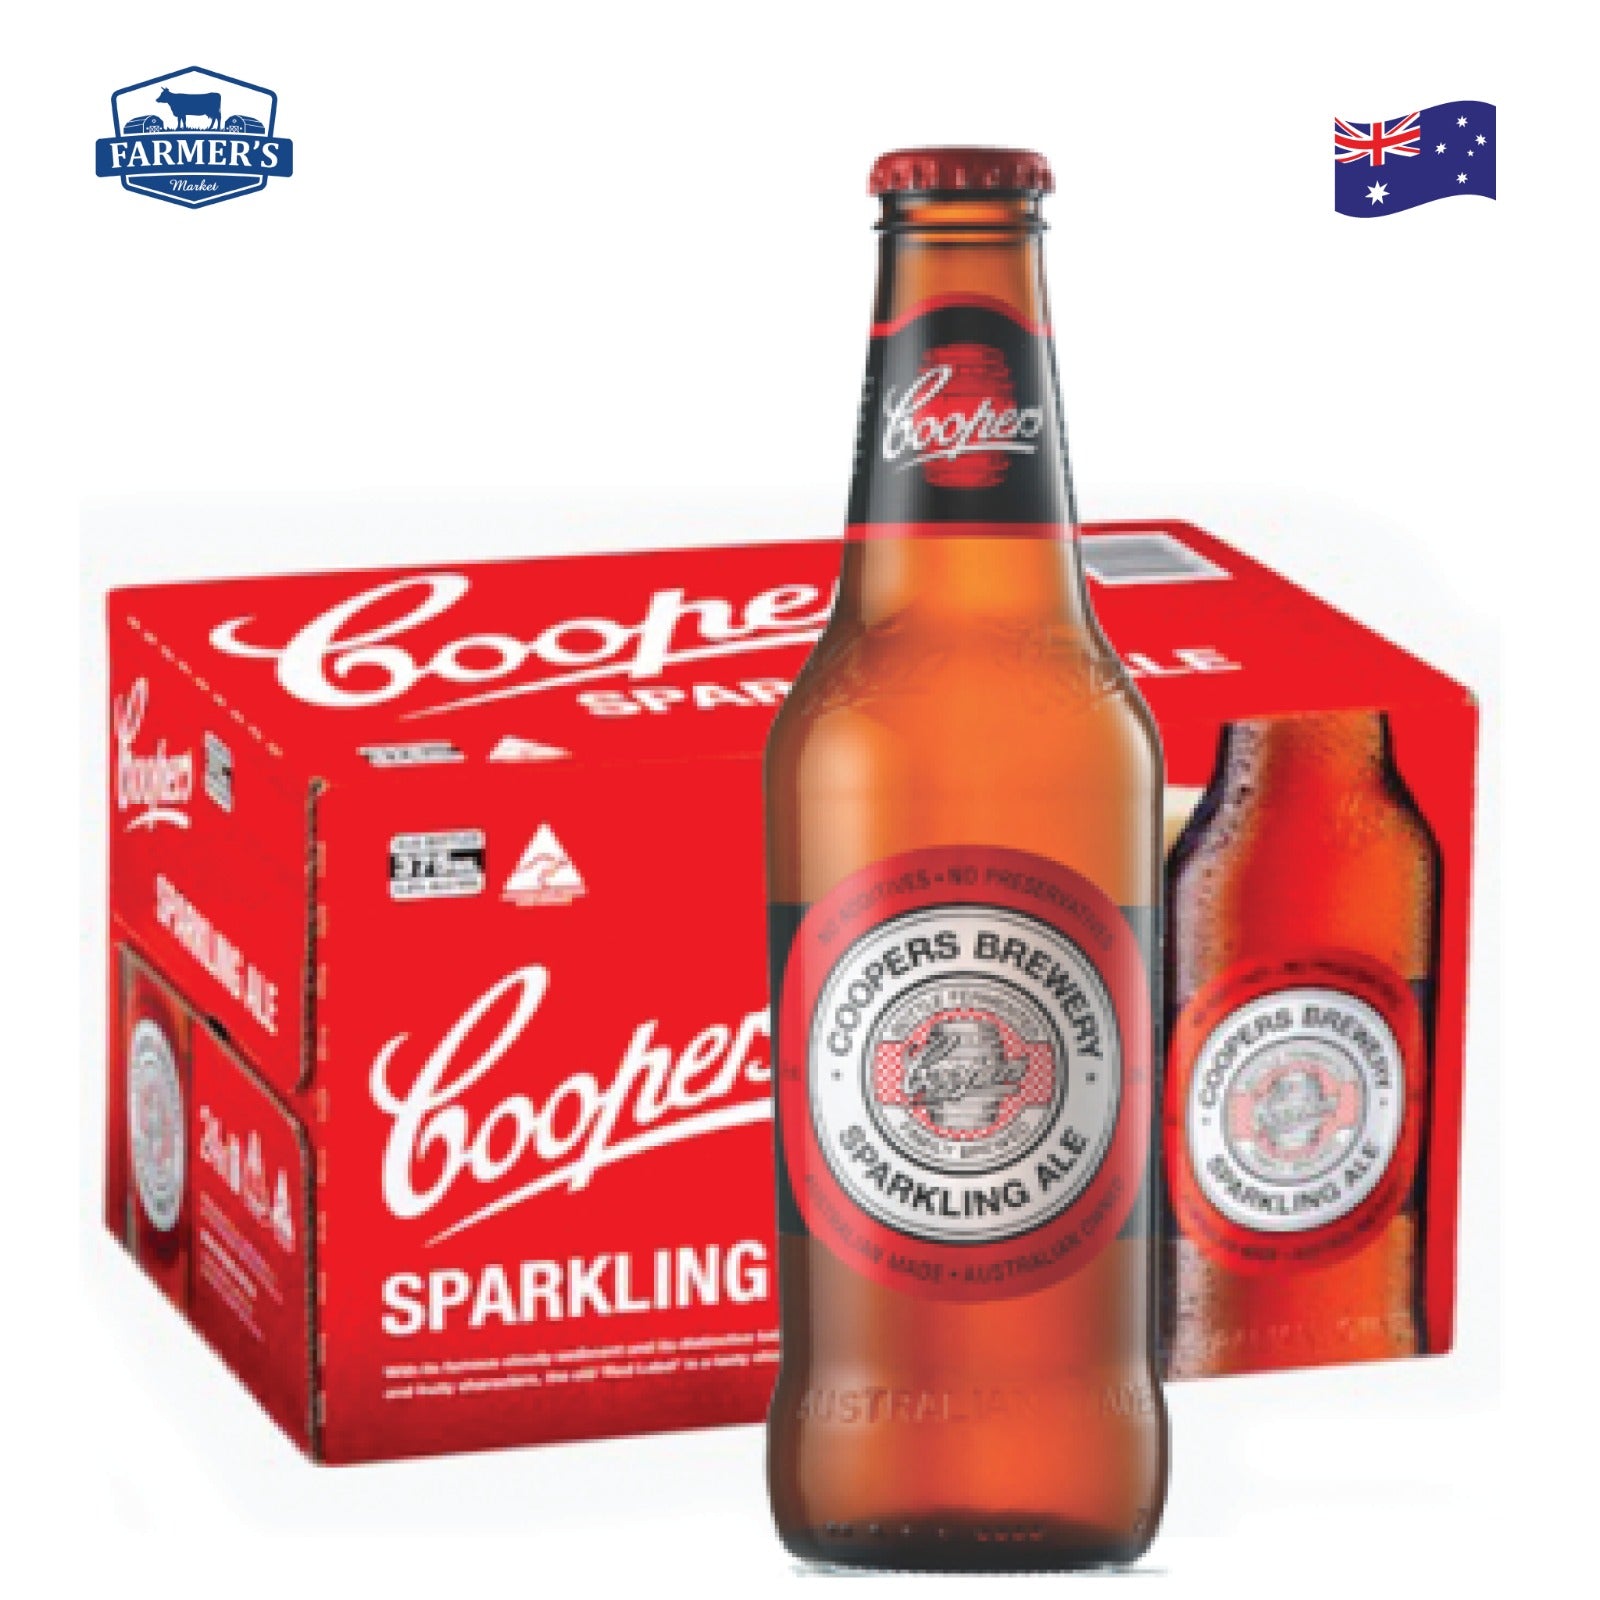 Case of Coopers Sparkling Ale 24 x 375ml bottles